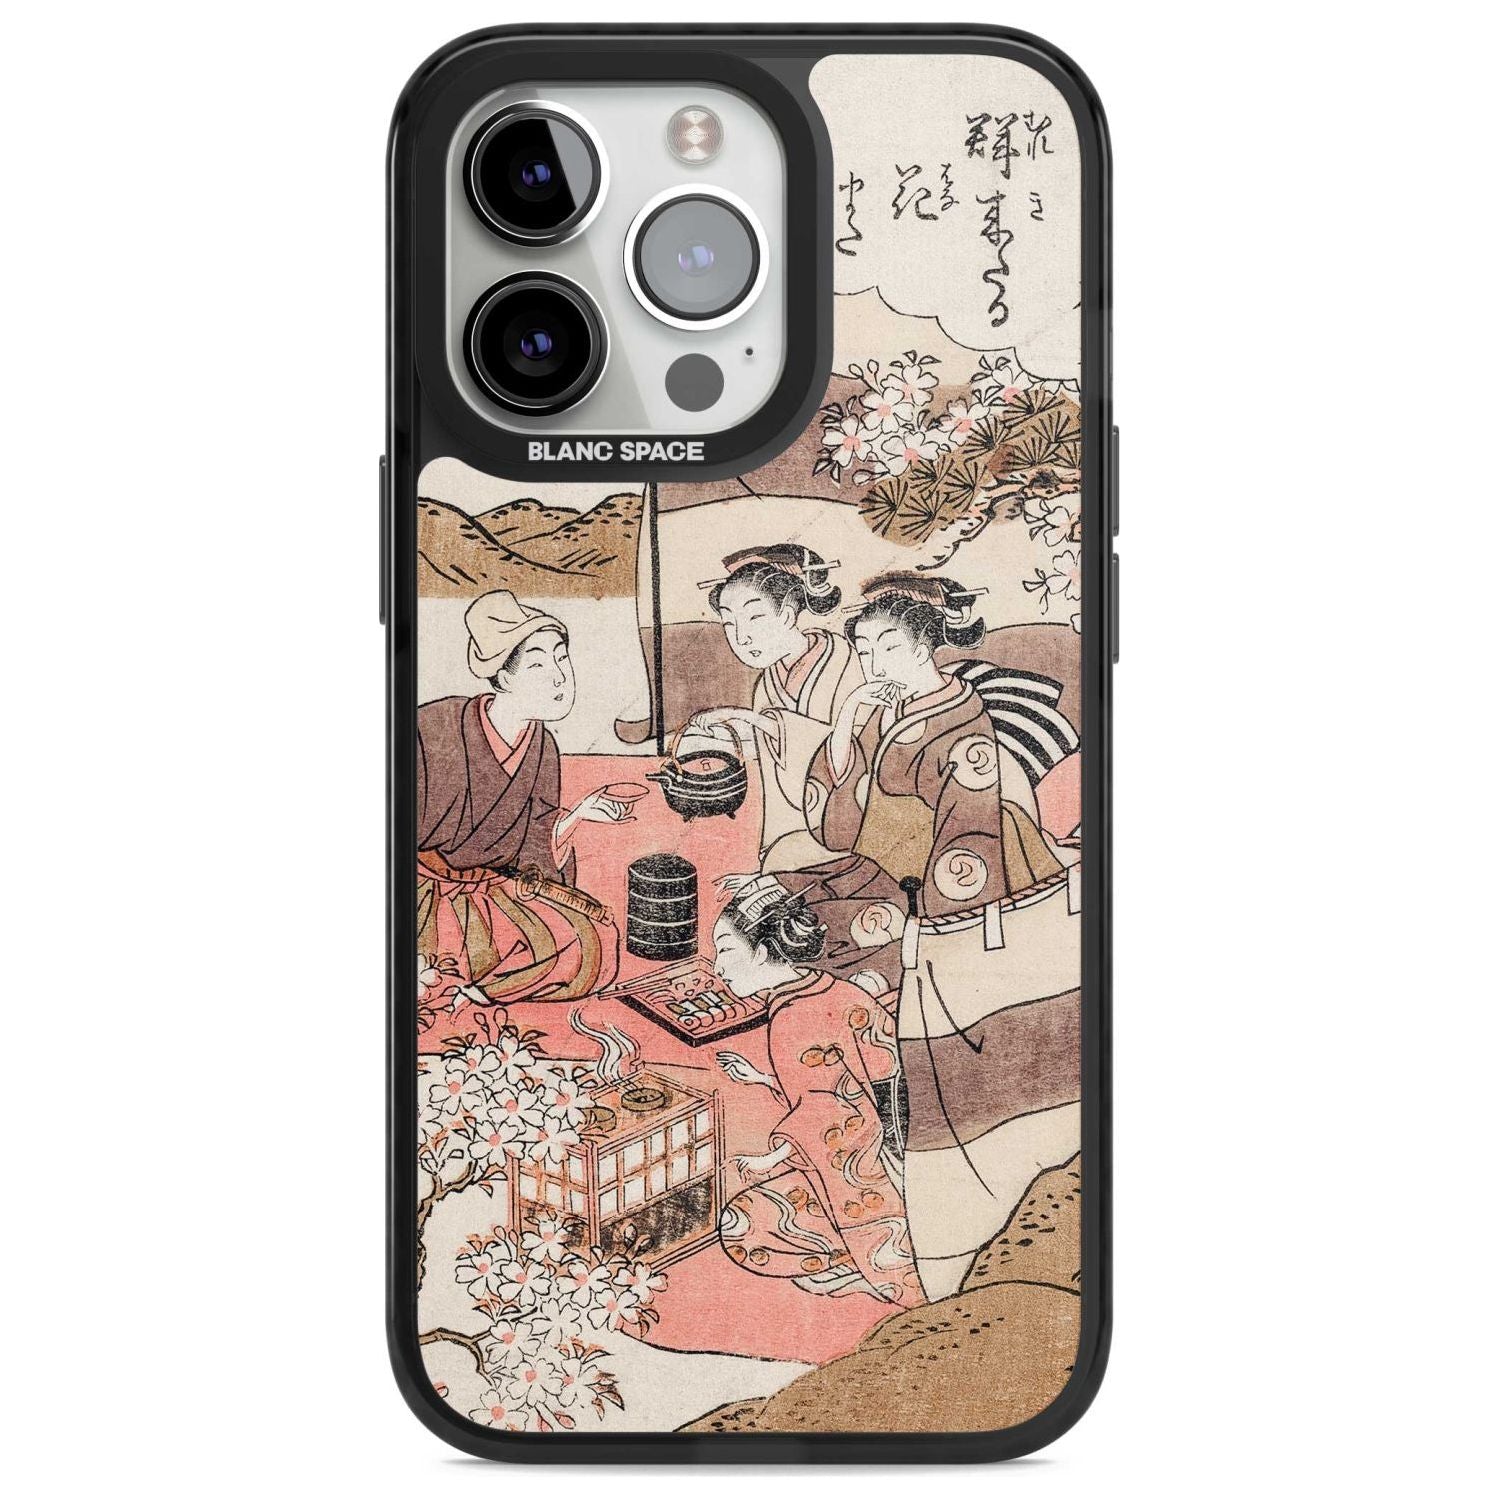 Japanese Afternoon Tea Phone Case iPhone 15 Pro Max / Magsafe Black Impact Case,iPhone 15 Pro / Magsafe Black Impact Case,iPhone 14 Pro Max / Magsafe Black Impact Case,iPhone 14 Pro / Magsafe Black Impact Case,iPhone 13 Pro / Magsafe Black Impact Case Blanc Space